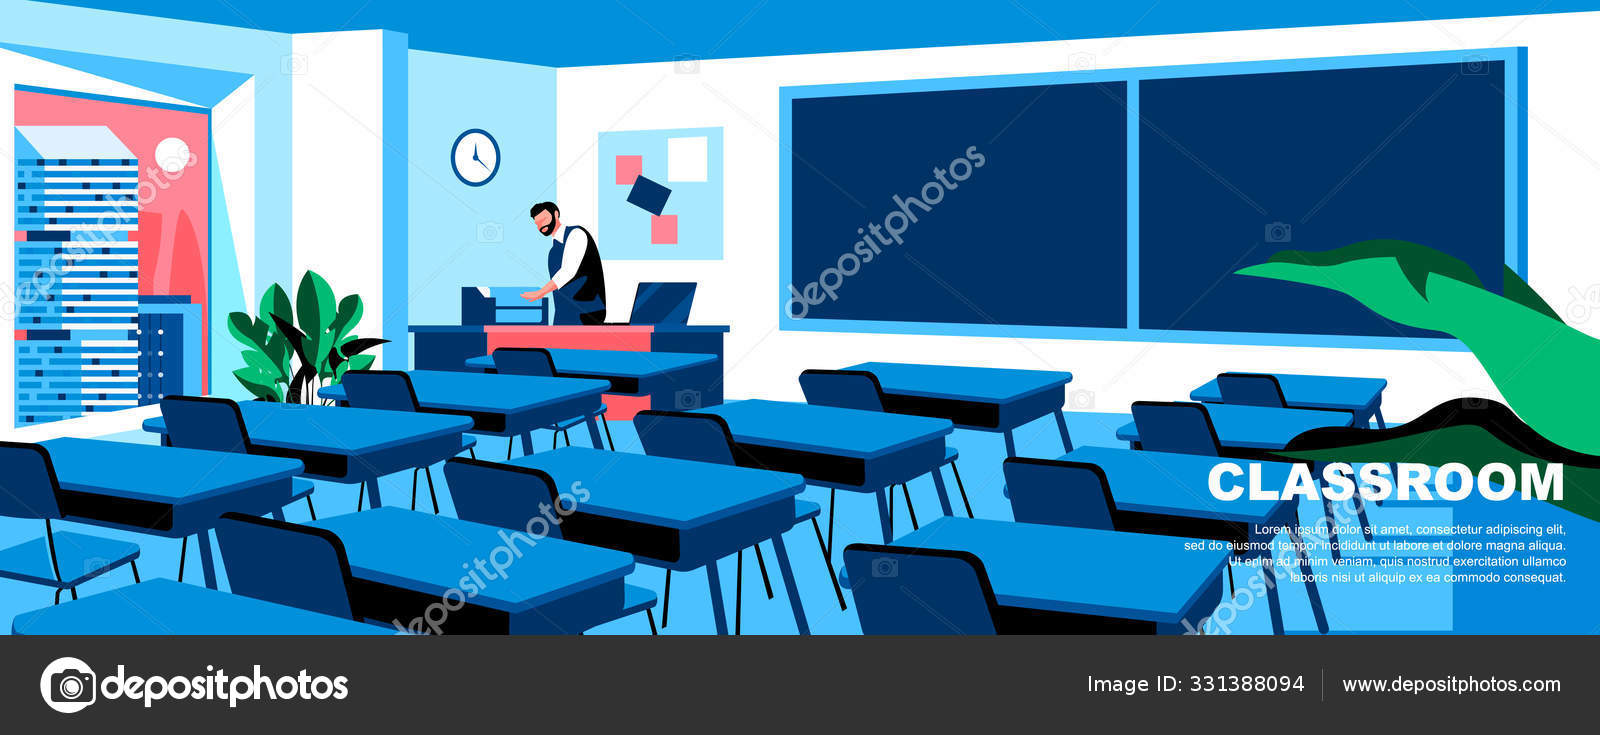 Classroom Flat Vector Landing Page Template Desk With Chairs And